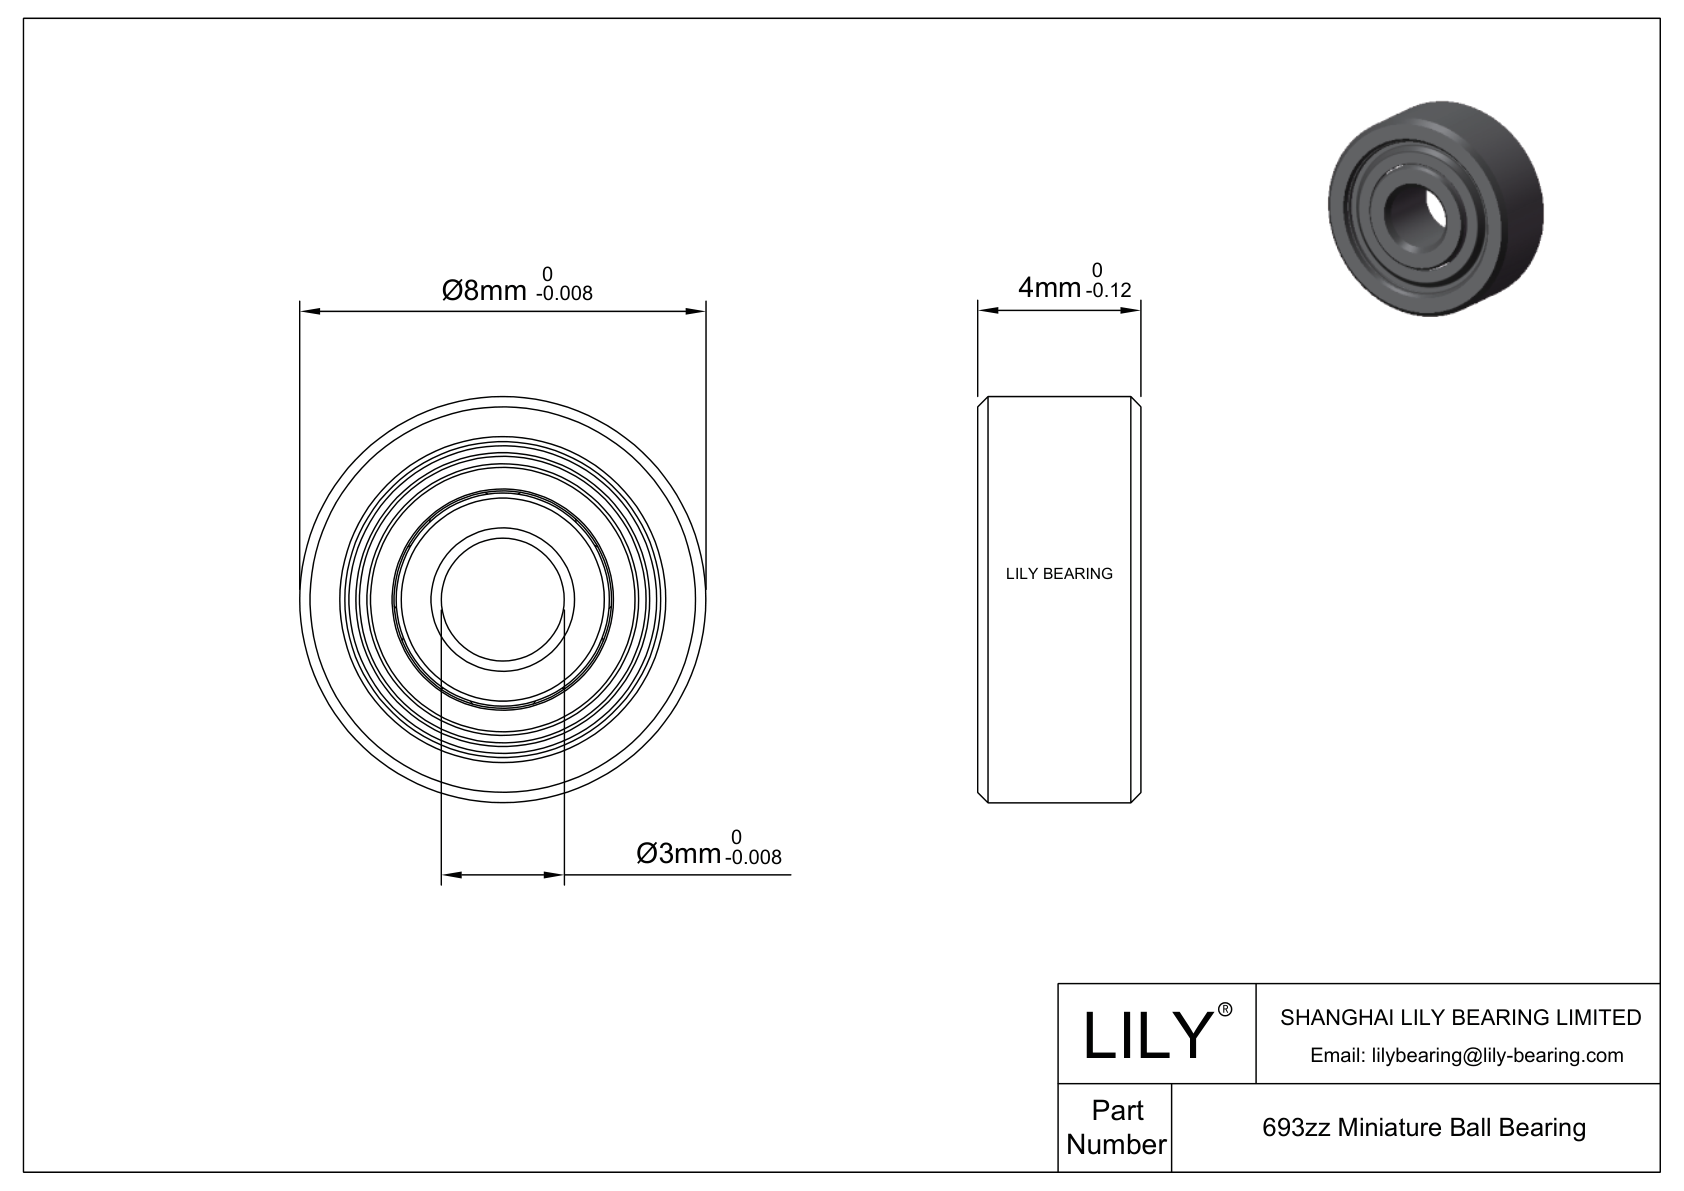 LILY-PUT69315-26 Outsourcing Polyurethane bearings cad drawing